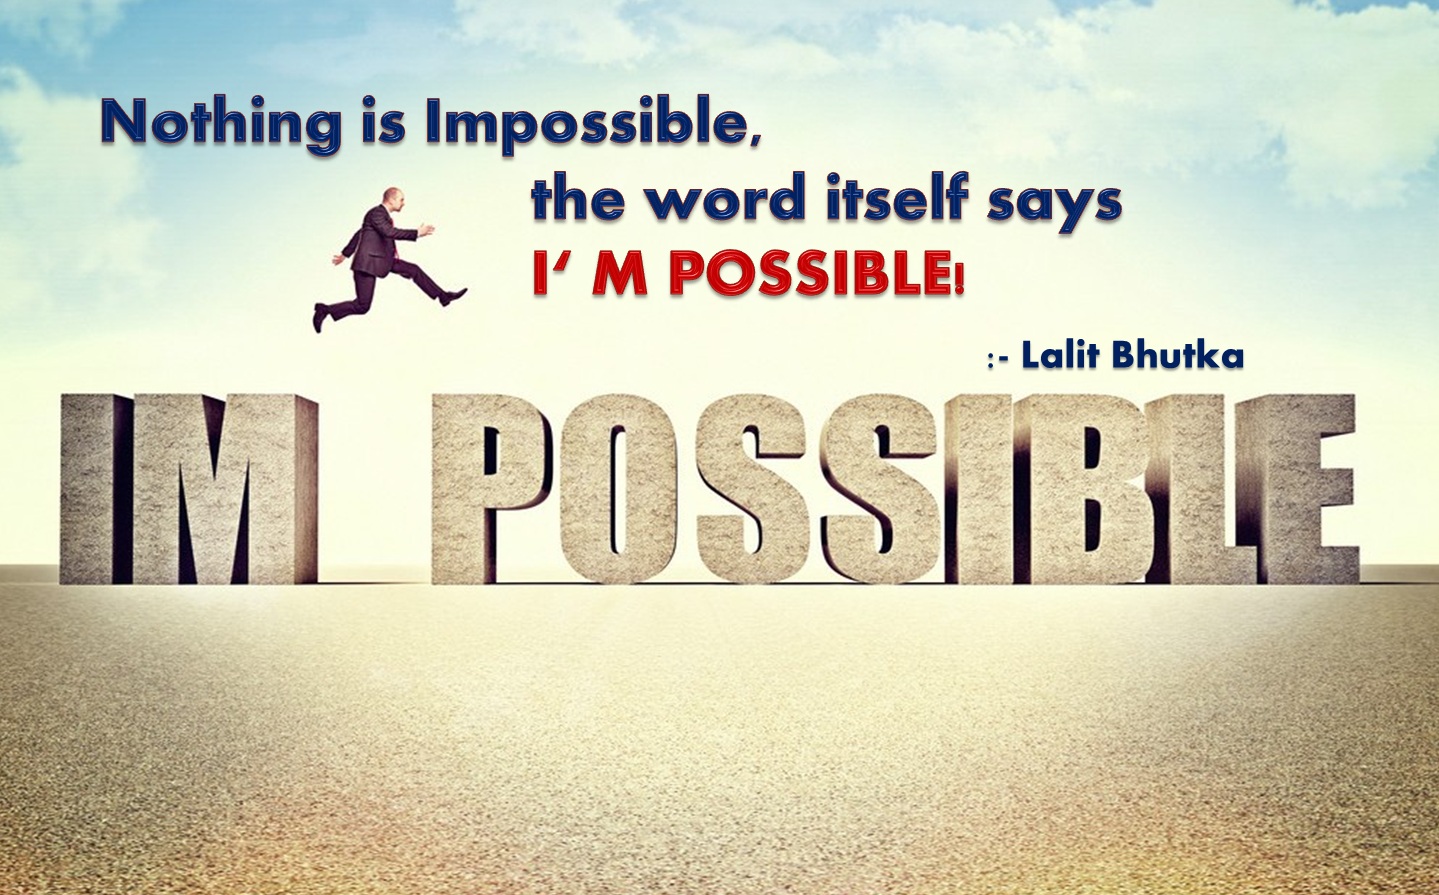 Impossible possible. Импосибл. Possible агентство. Impossible надпись. Nothing is Impossible. The World itself says Impossible.